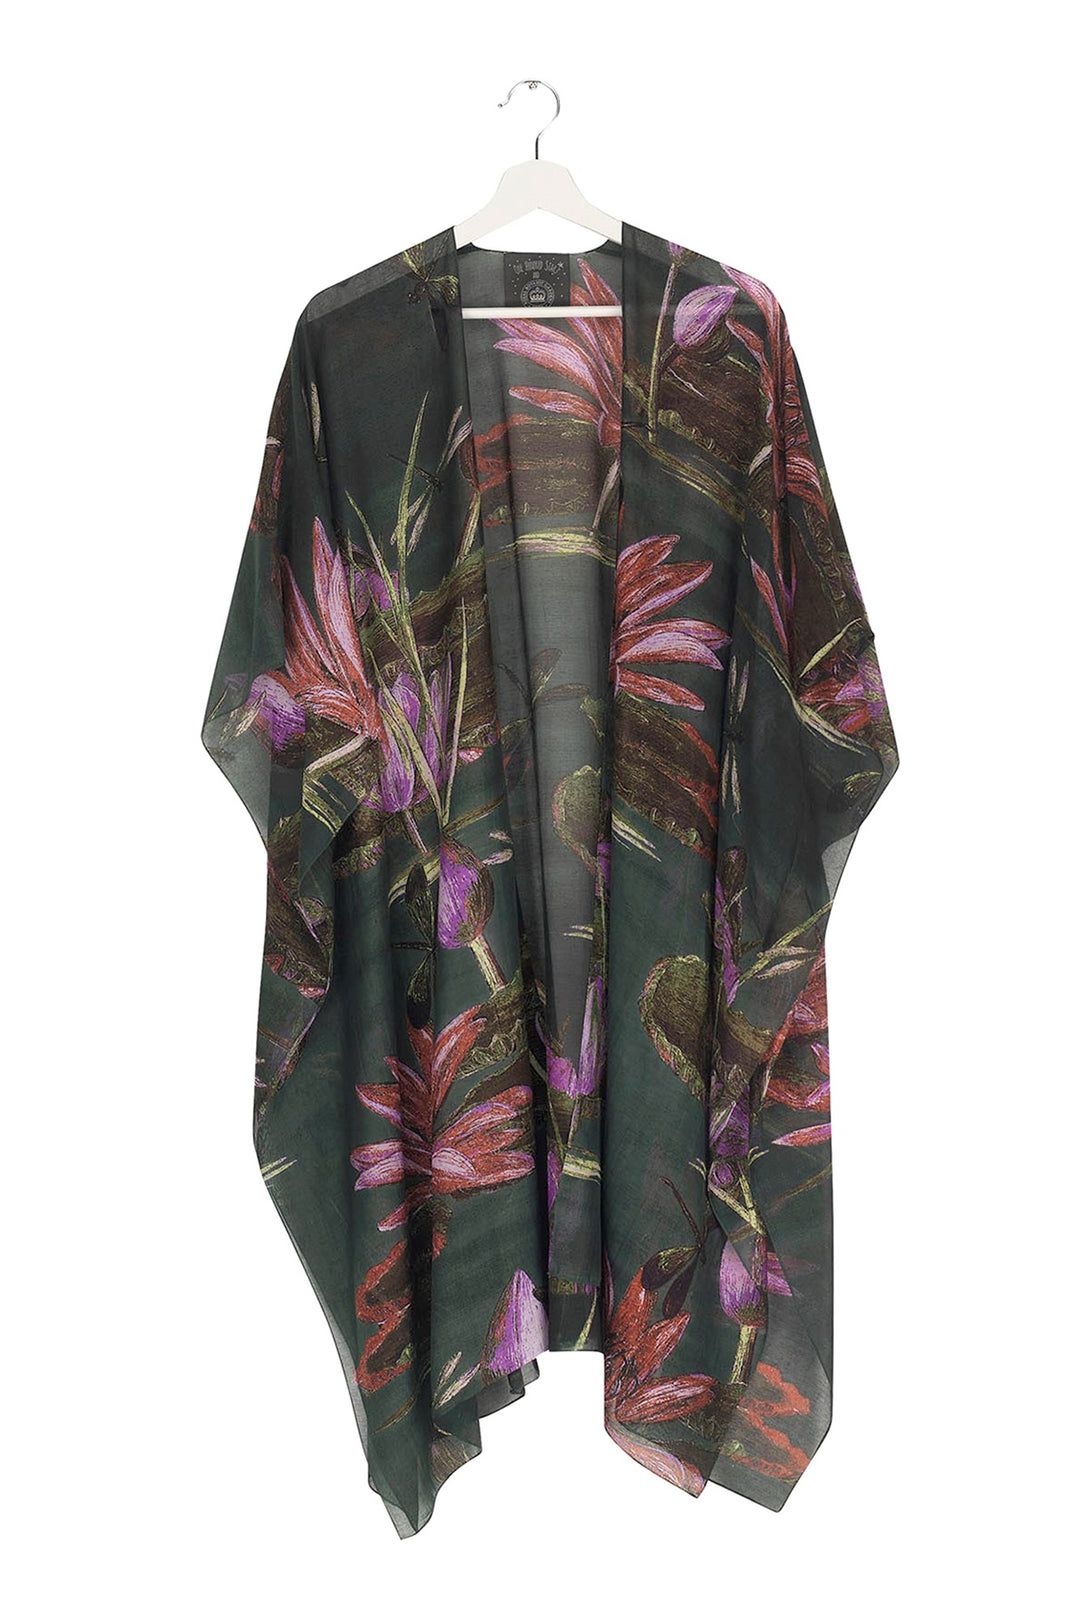 Marianne North Indian Lily Throwover- These lightweight throwovers make the perfect cover up, they are mid-length with an open front and loose arms, perfect for the warmer months or worn on holiday as the ideal resort wear. 